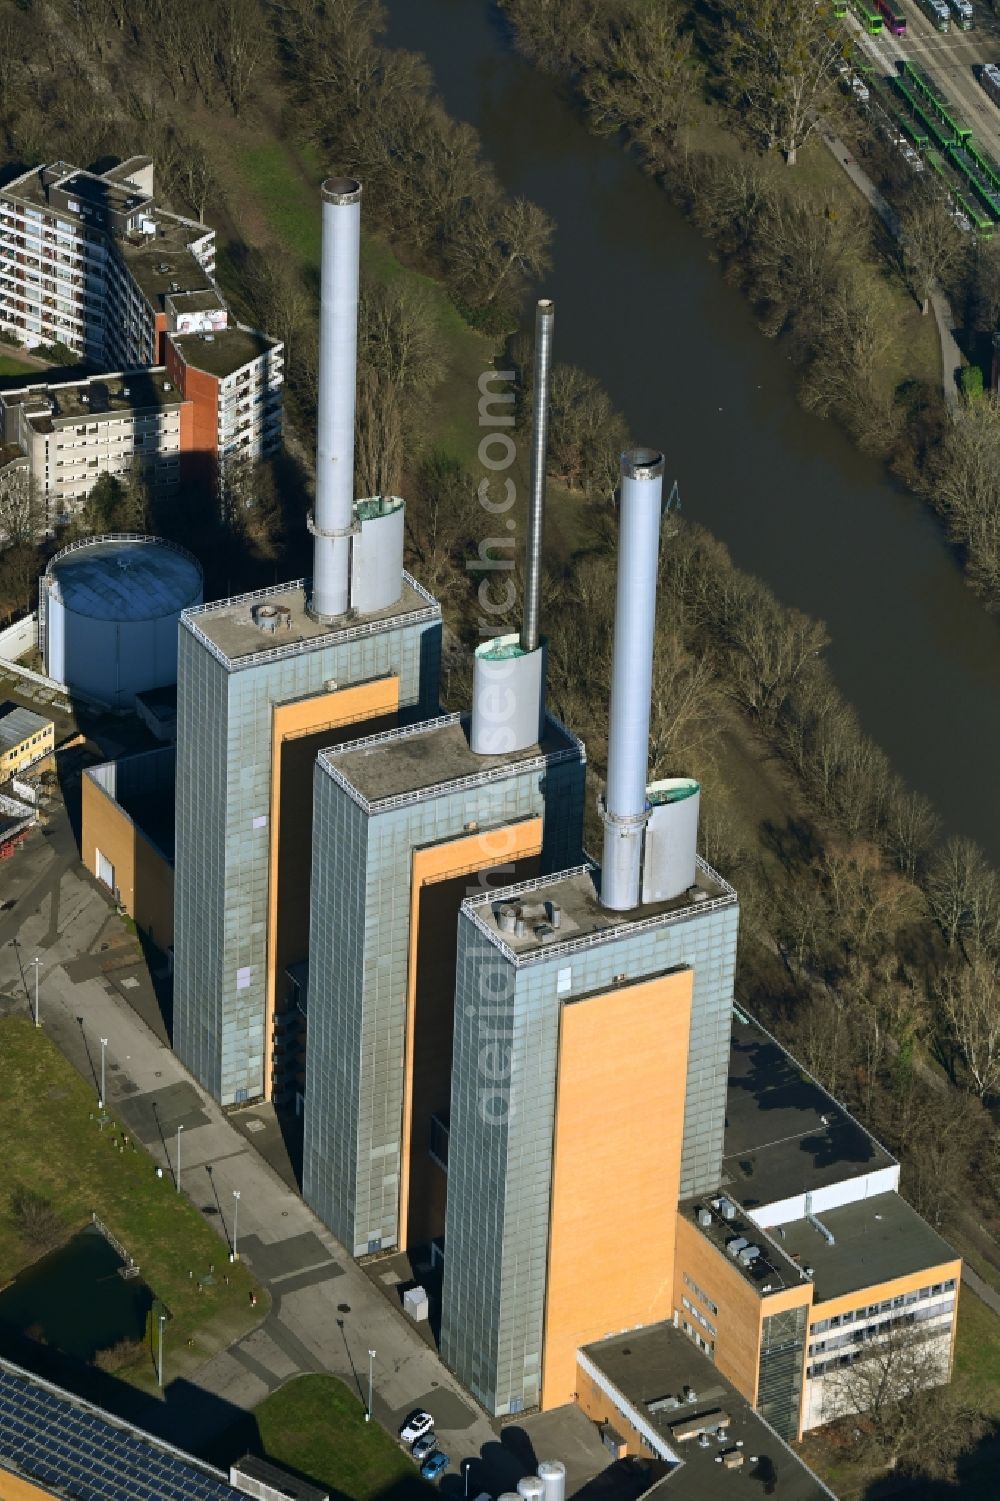 Aerial image Hannover - Power station plants of the combined heat and power station - regional heat Heizkraftwerk Linden on Spinnereistrasse in the district Linden - Nord in Hannover in the state Lower Saxony, Germany